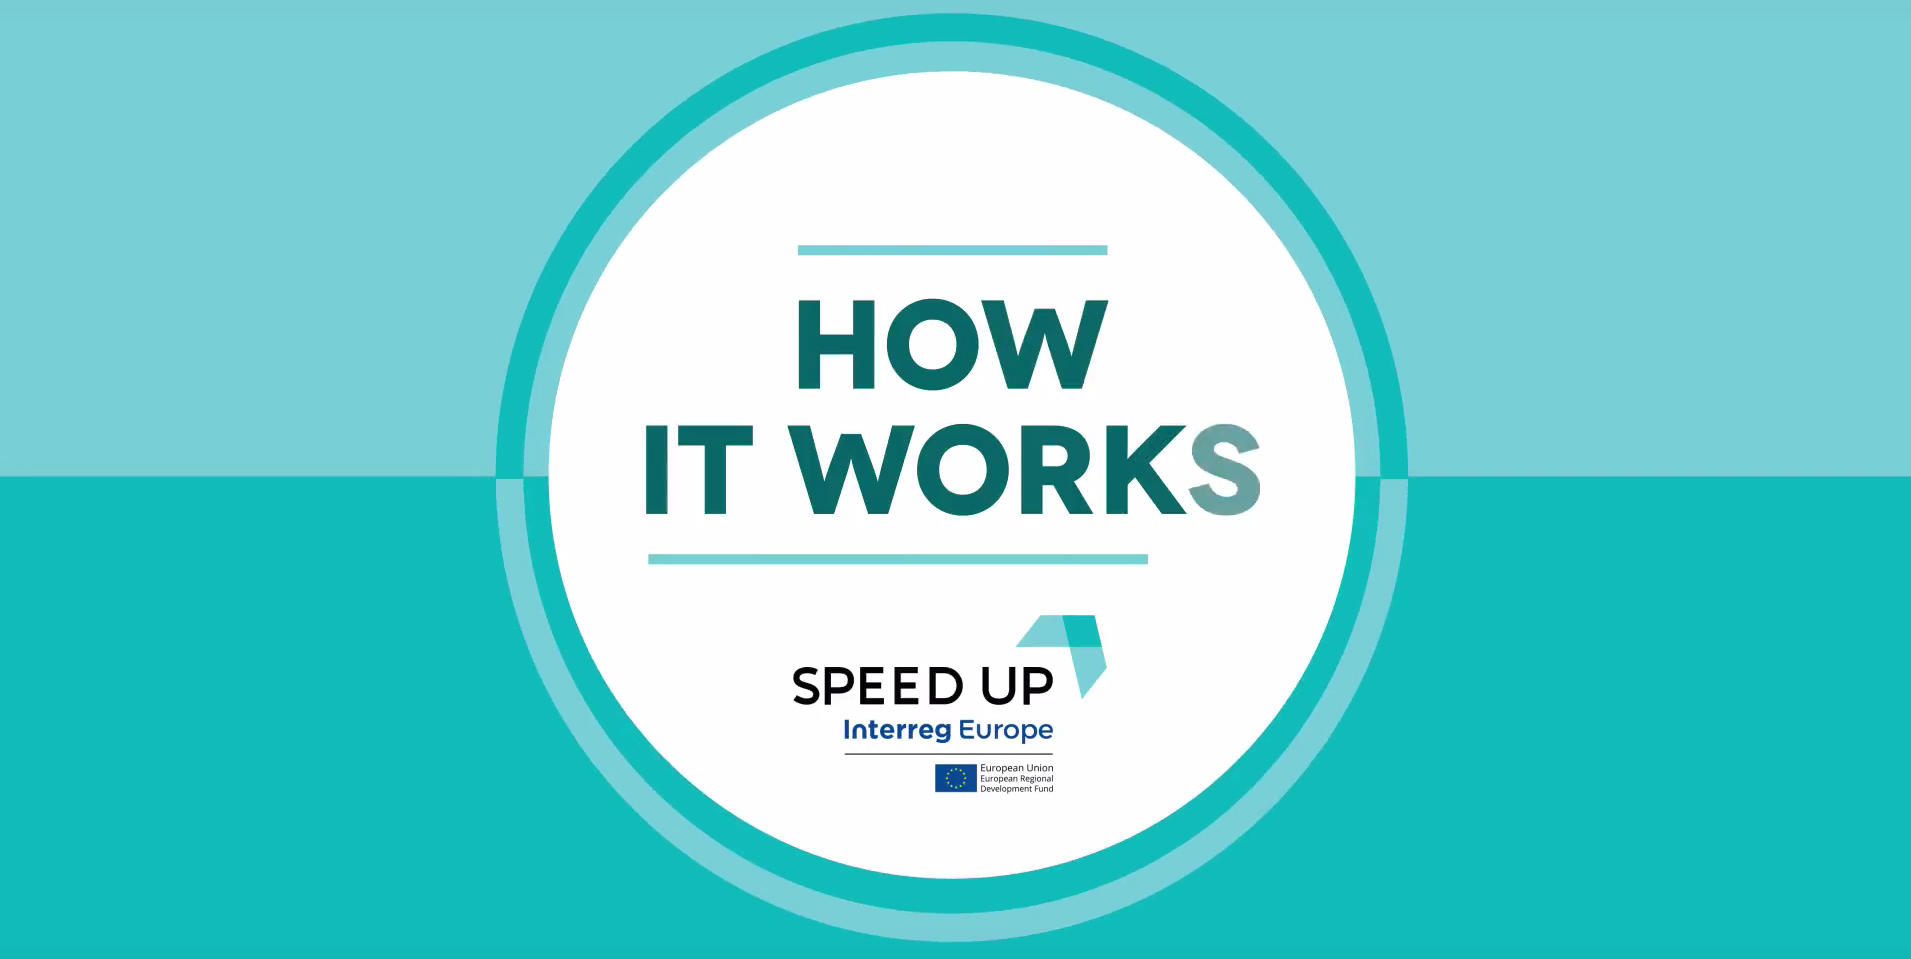 "HOW IT WORKS" the SPEED UP animated series